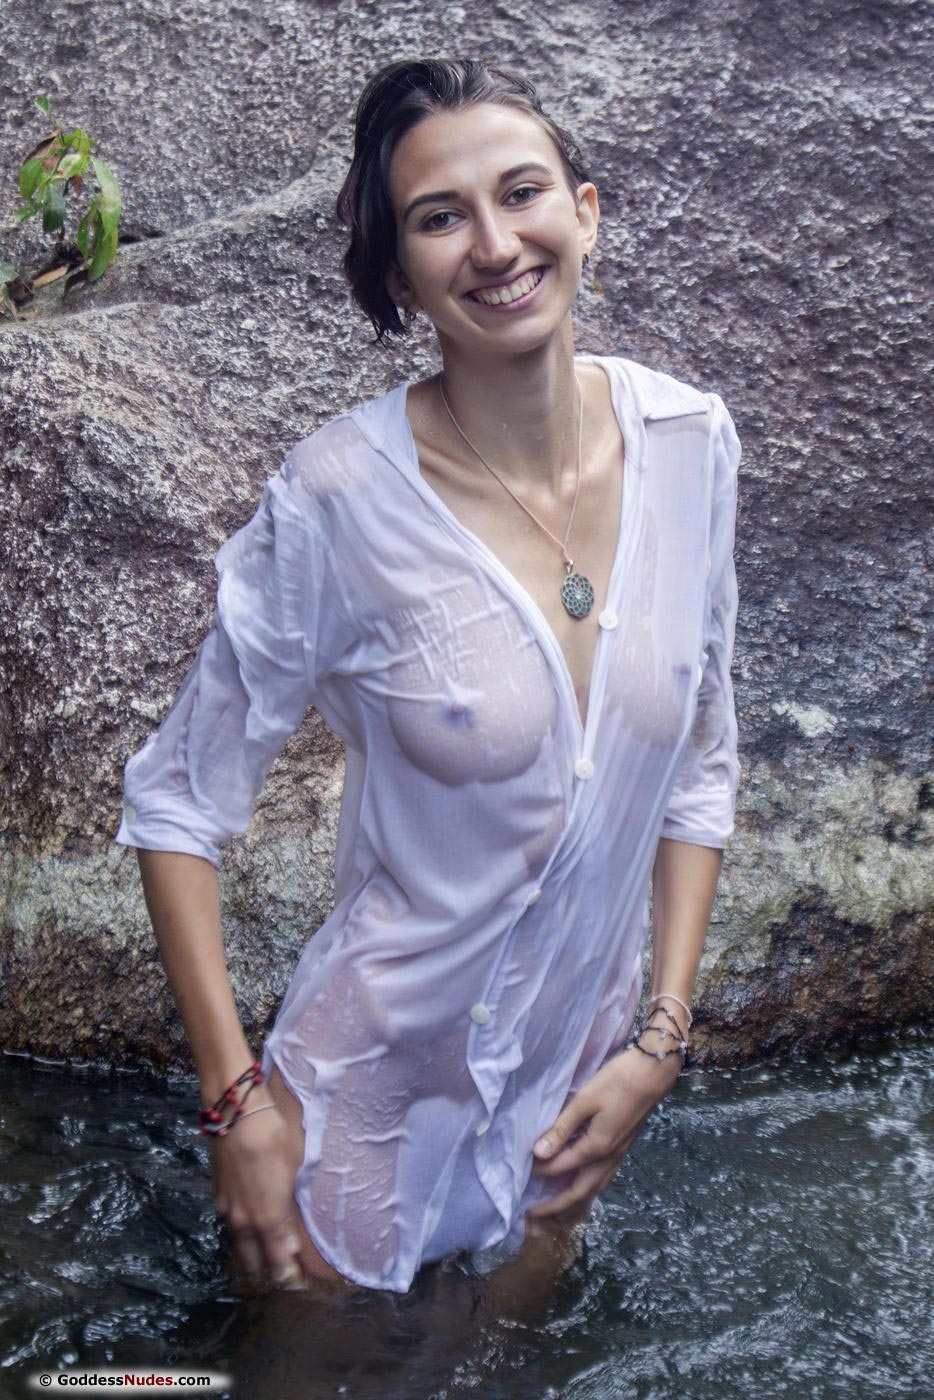 Alisa M Busty Wet Chick